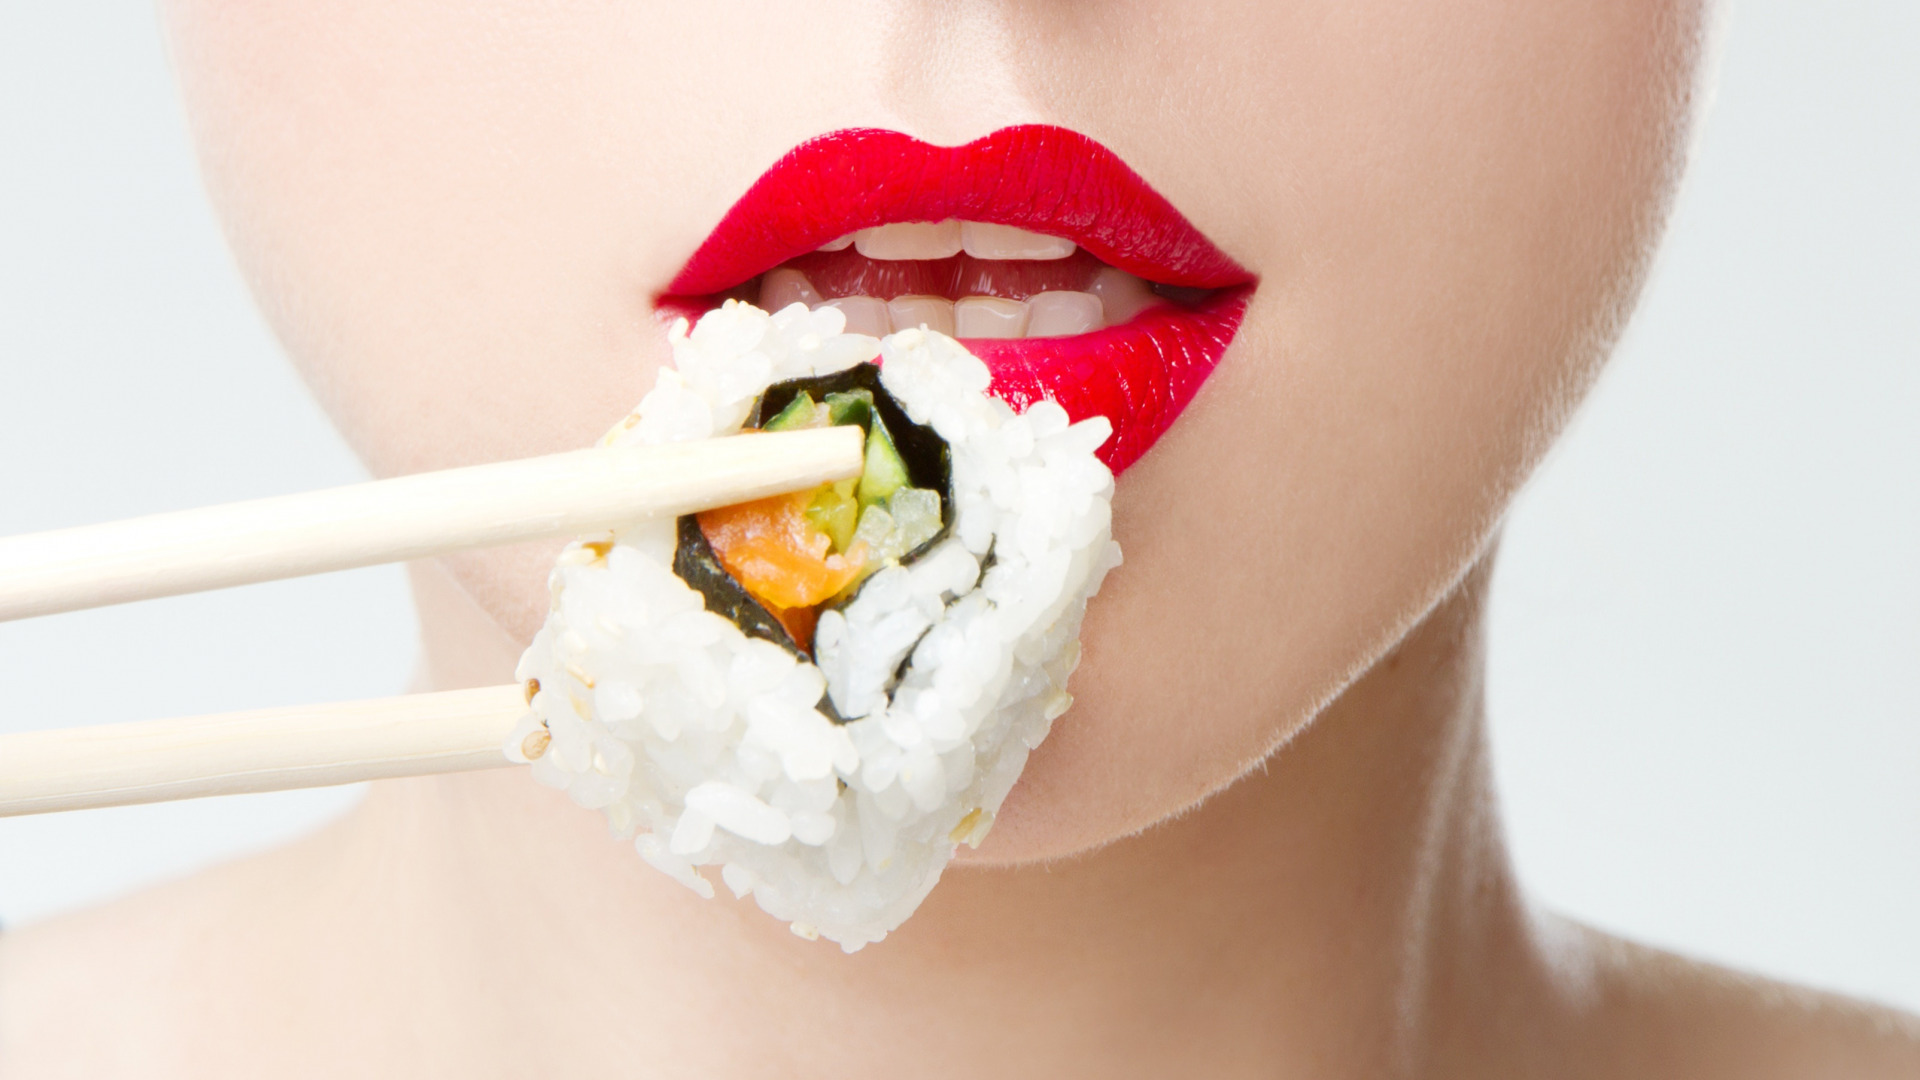 What Are the Health Benefits of Eating Sushi?